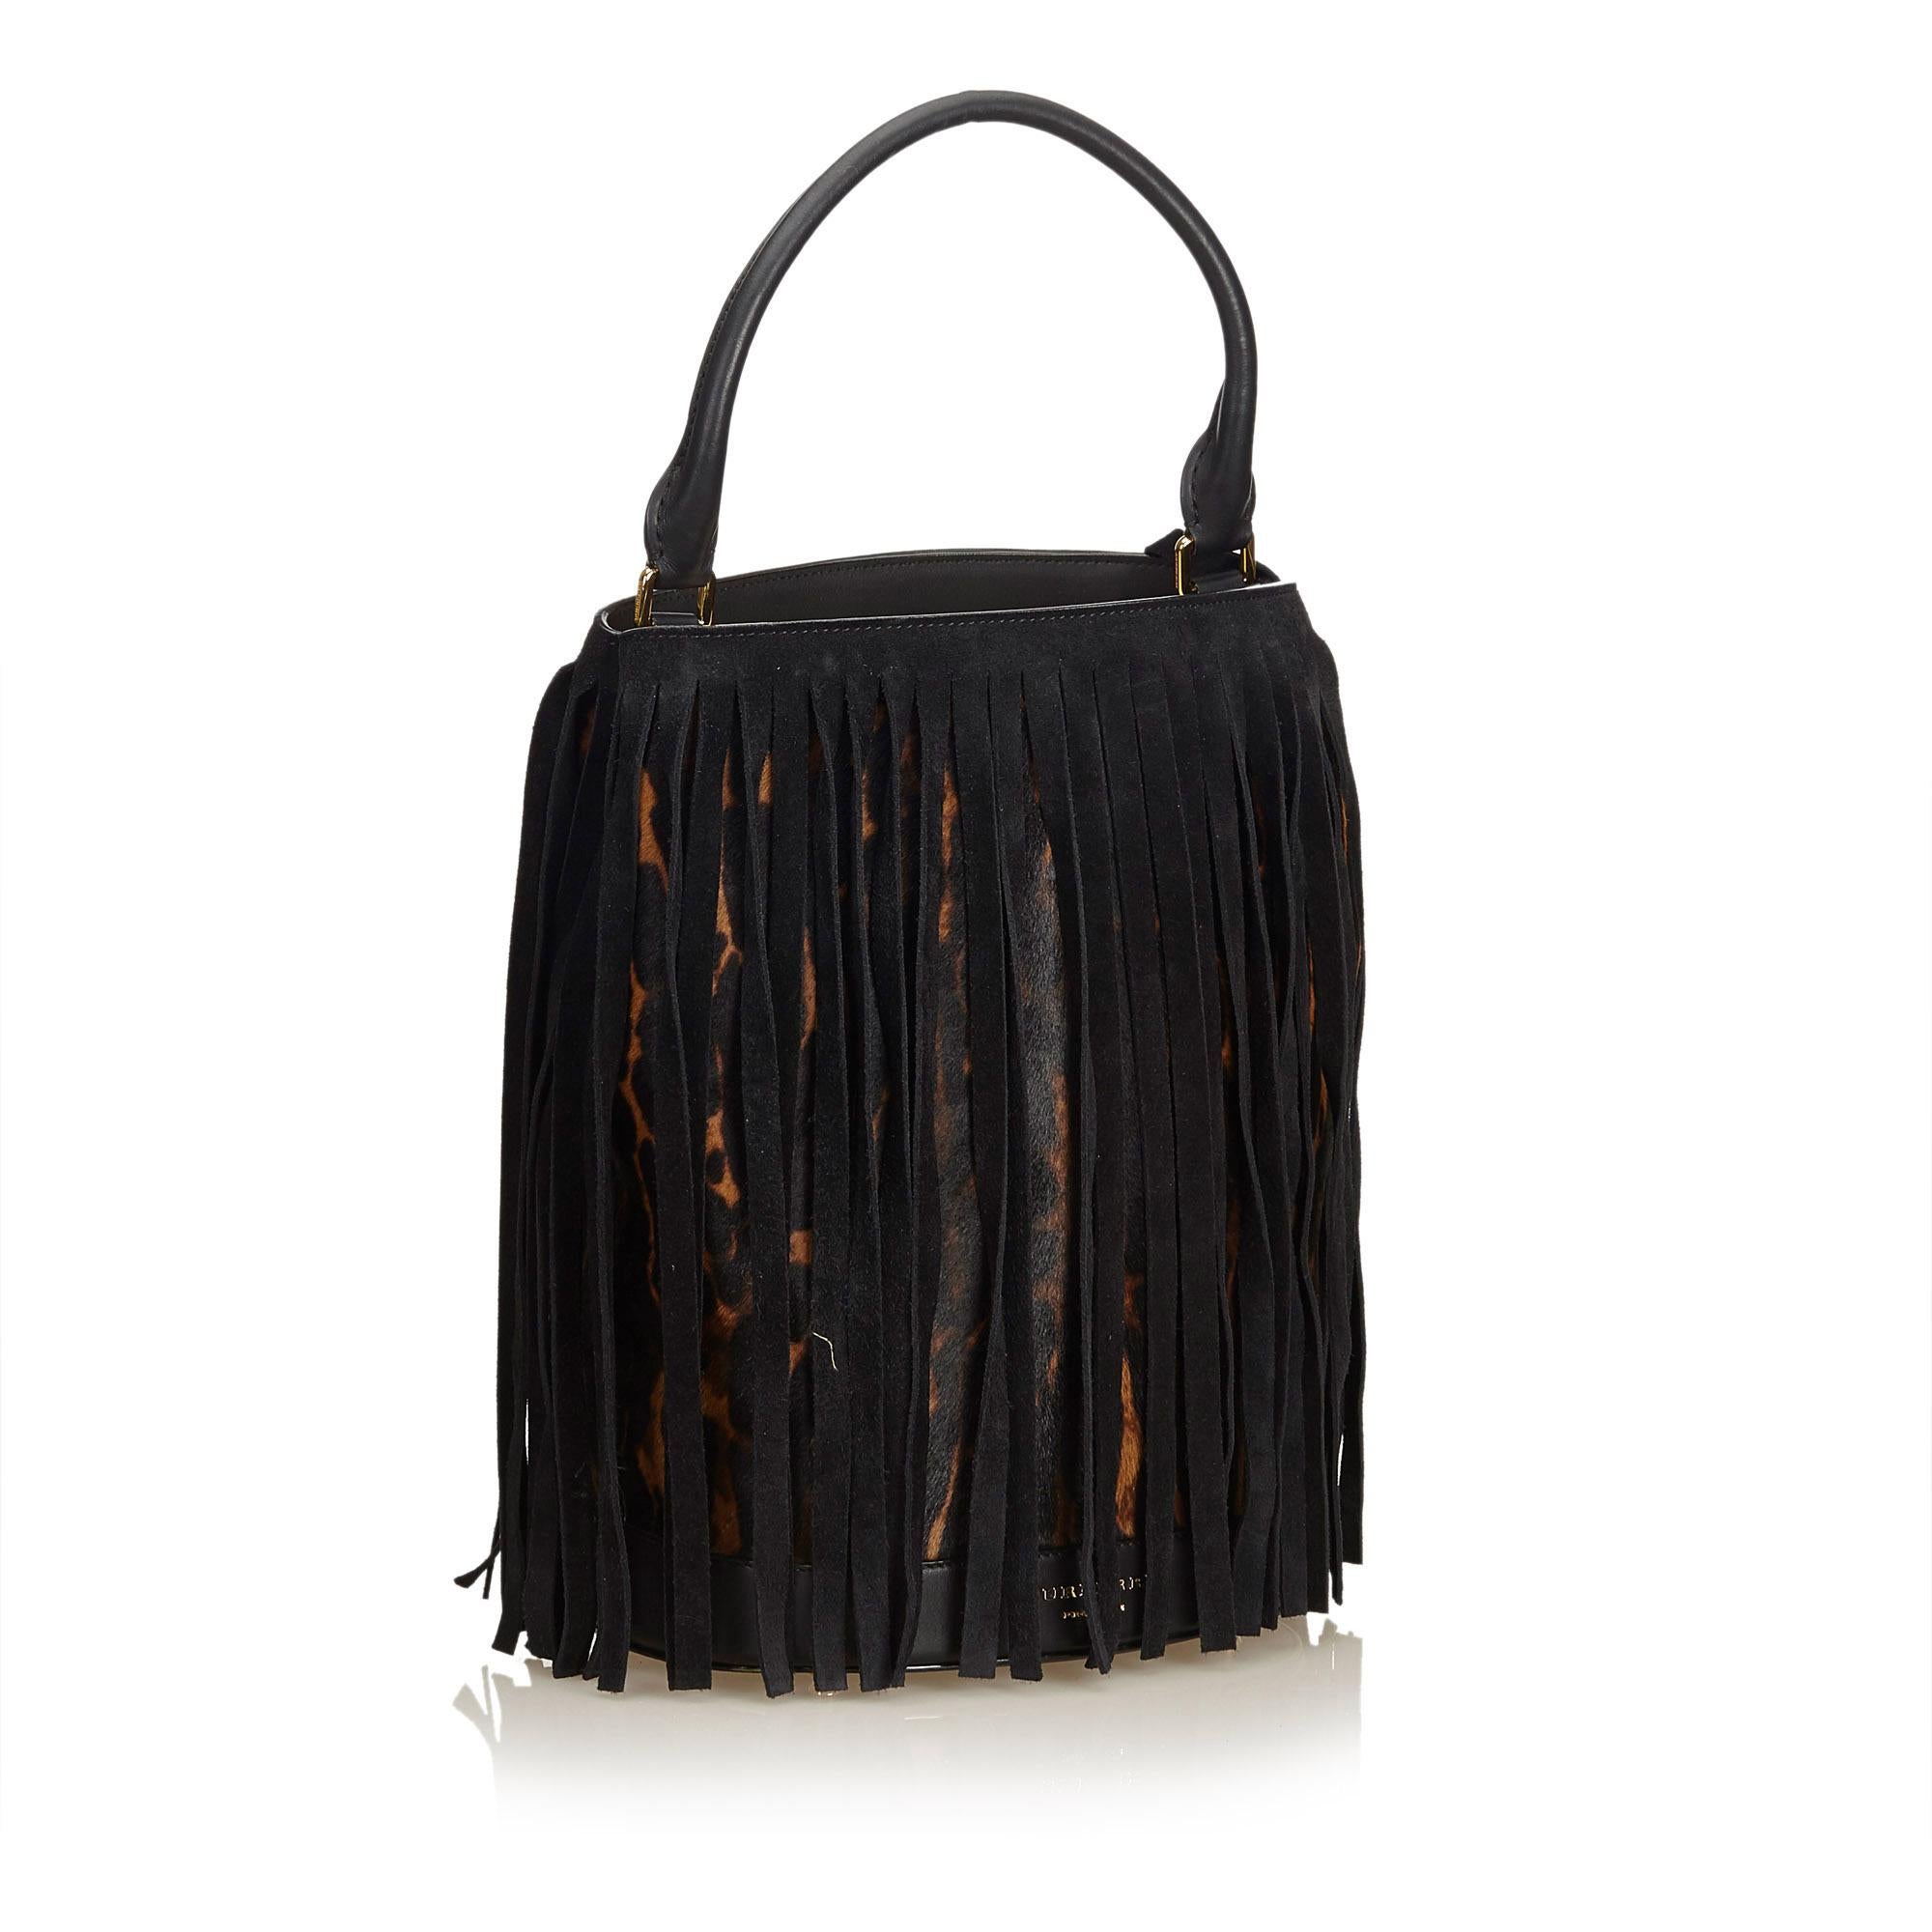 This handbag features a leopard print harako body with suede fringe detail, rolled leather handle, open top, and interior slip pocket. It carries as AB condition rating.

Inclusions: 
Dust Bag

Dimensions:
Length: 37.00 cm
Width: 26.00 cm
Depth: